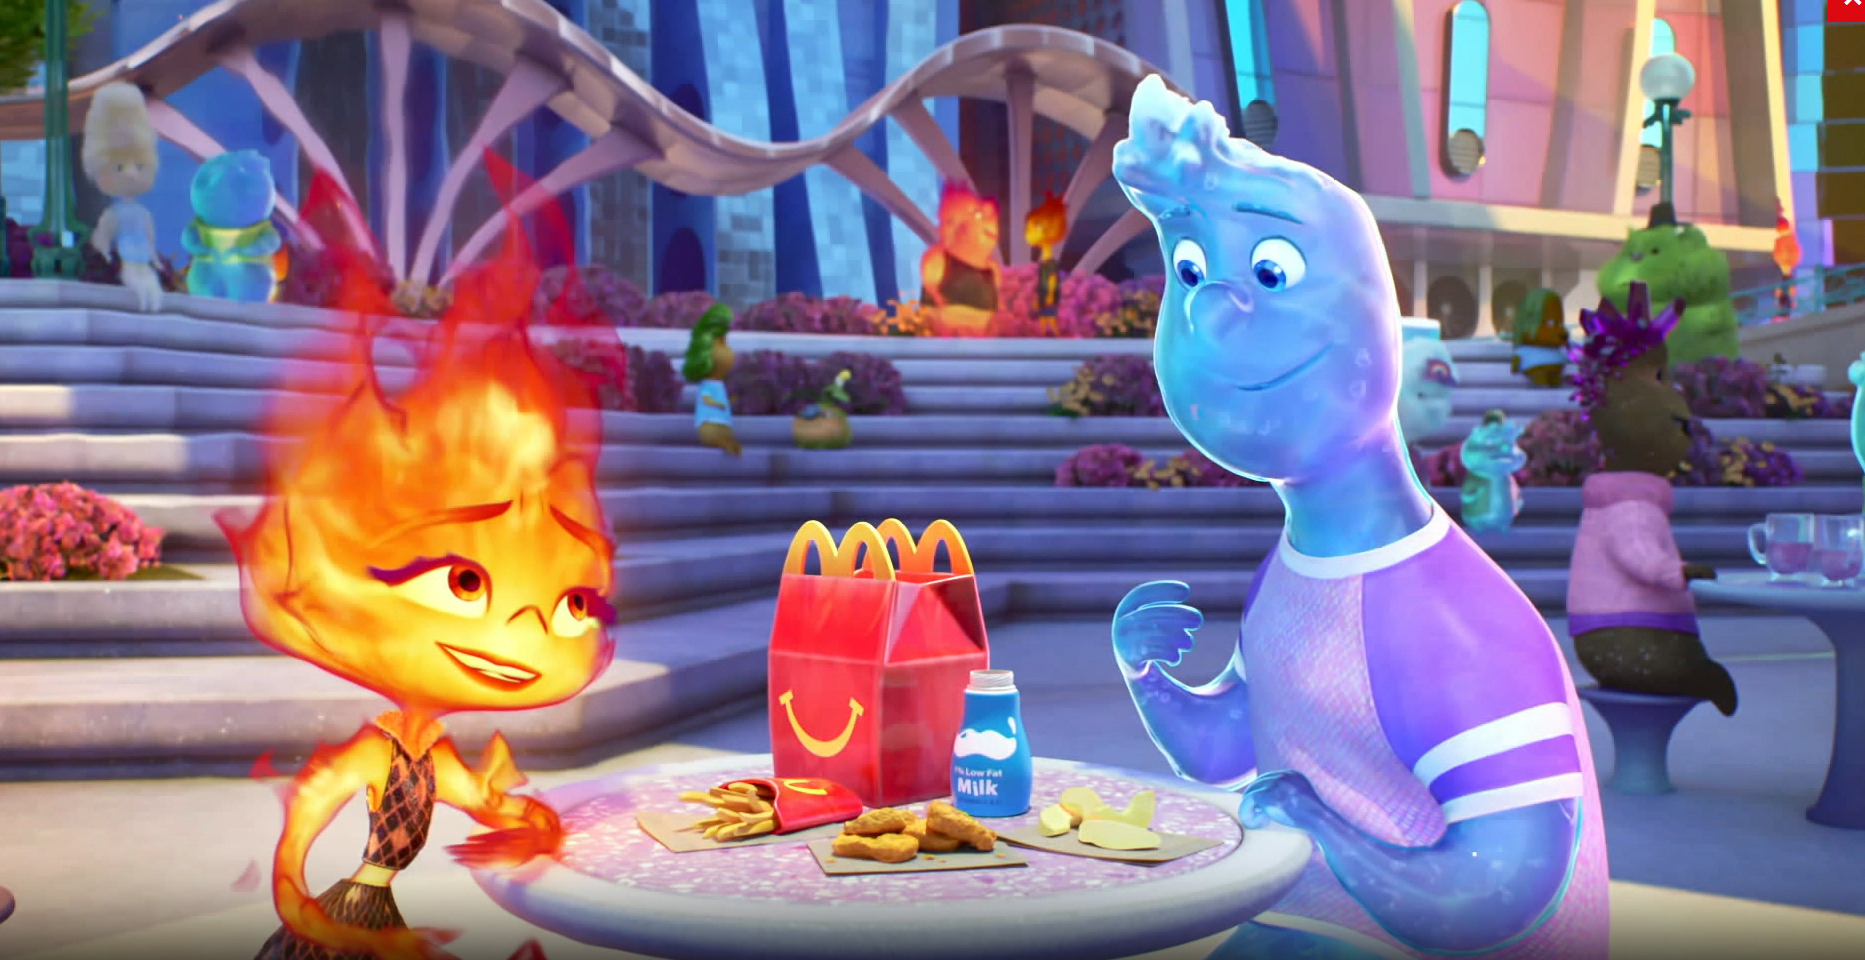 Pixar’s Elemental Happy Meal Toys Now Available at McDonald’s